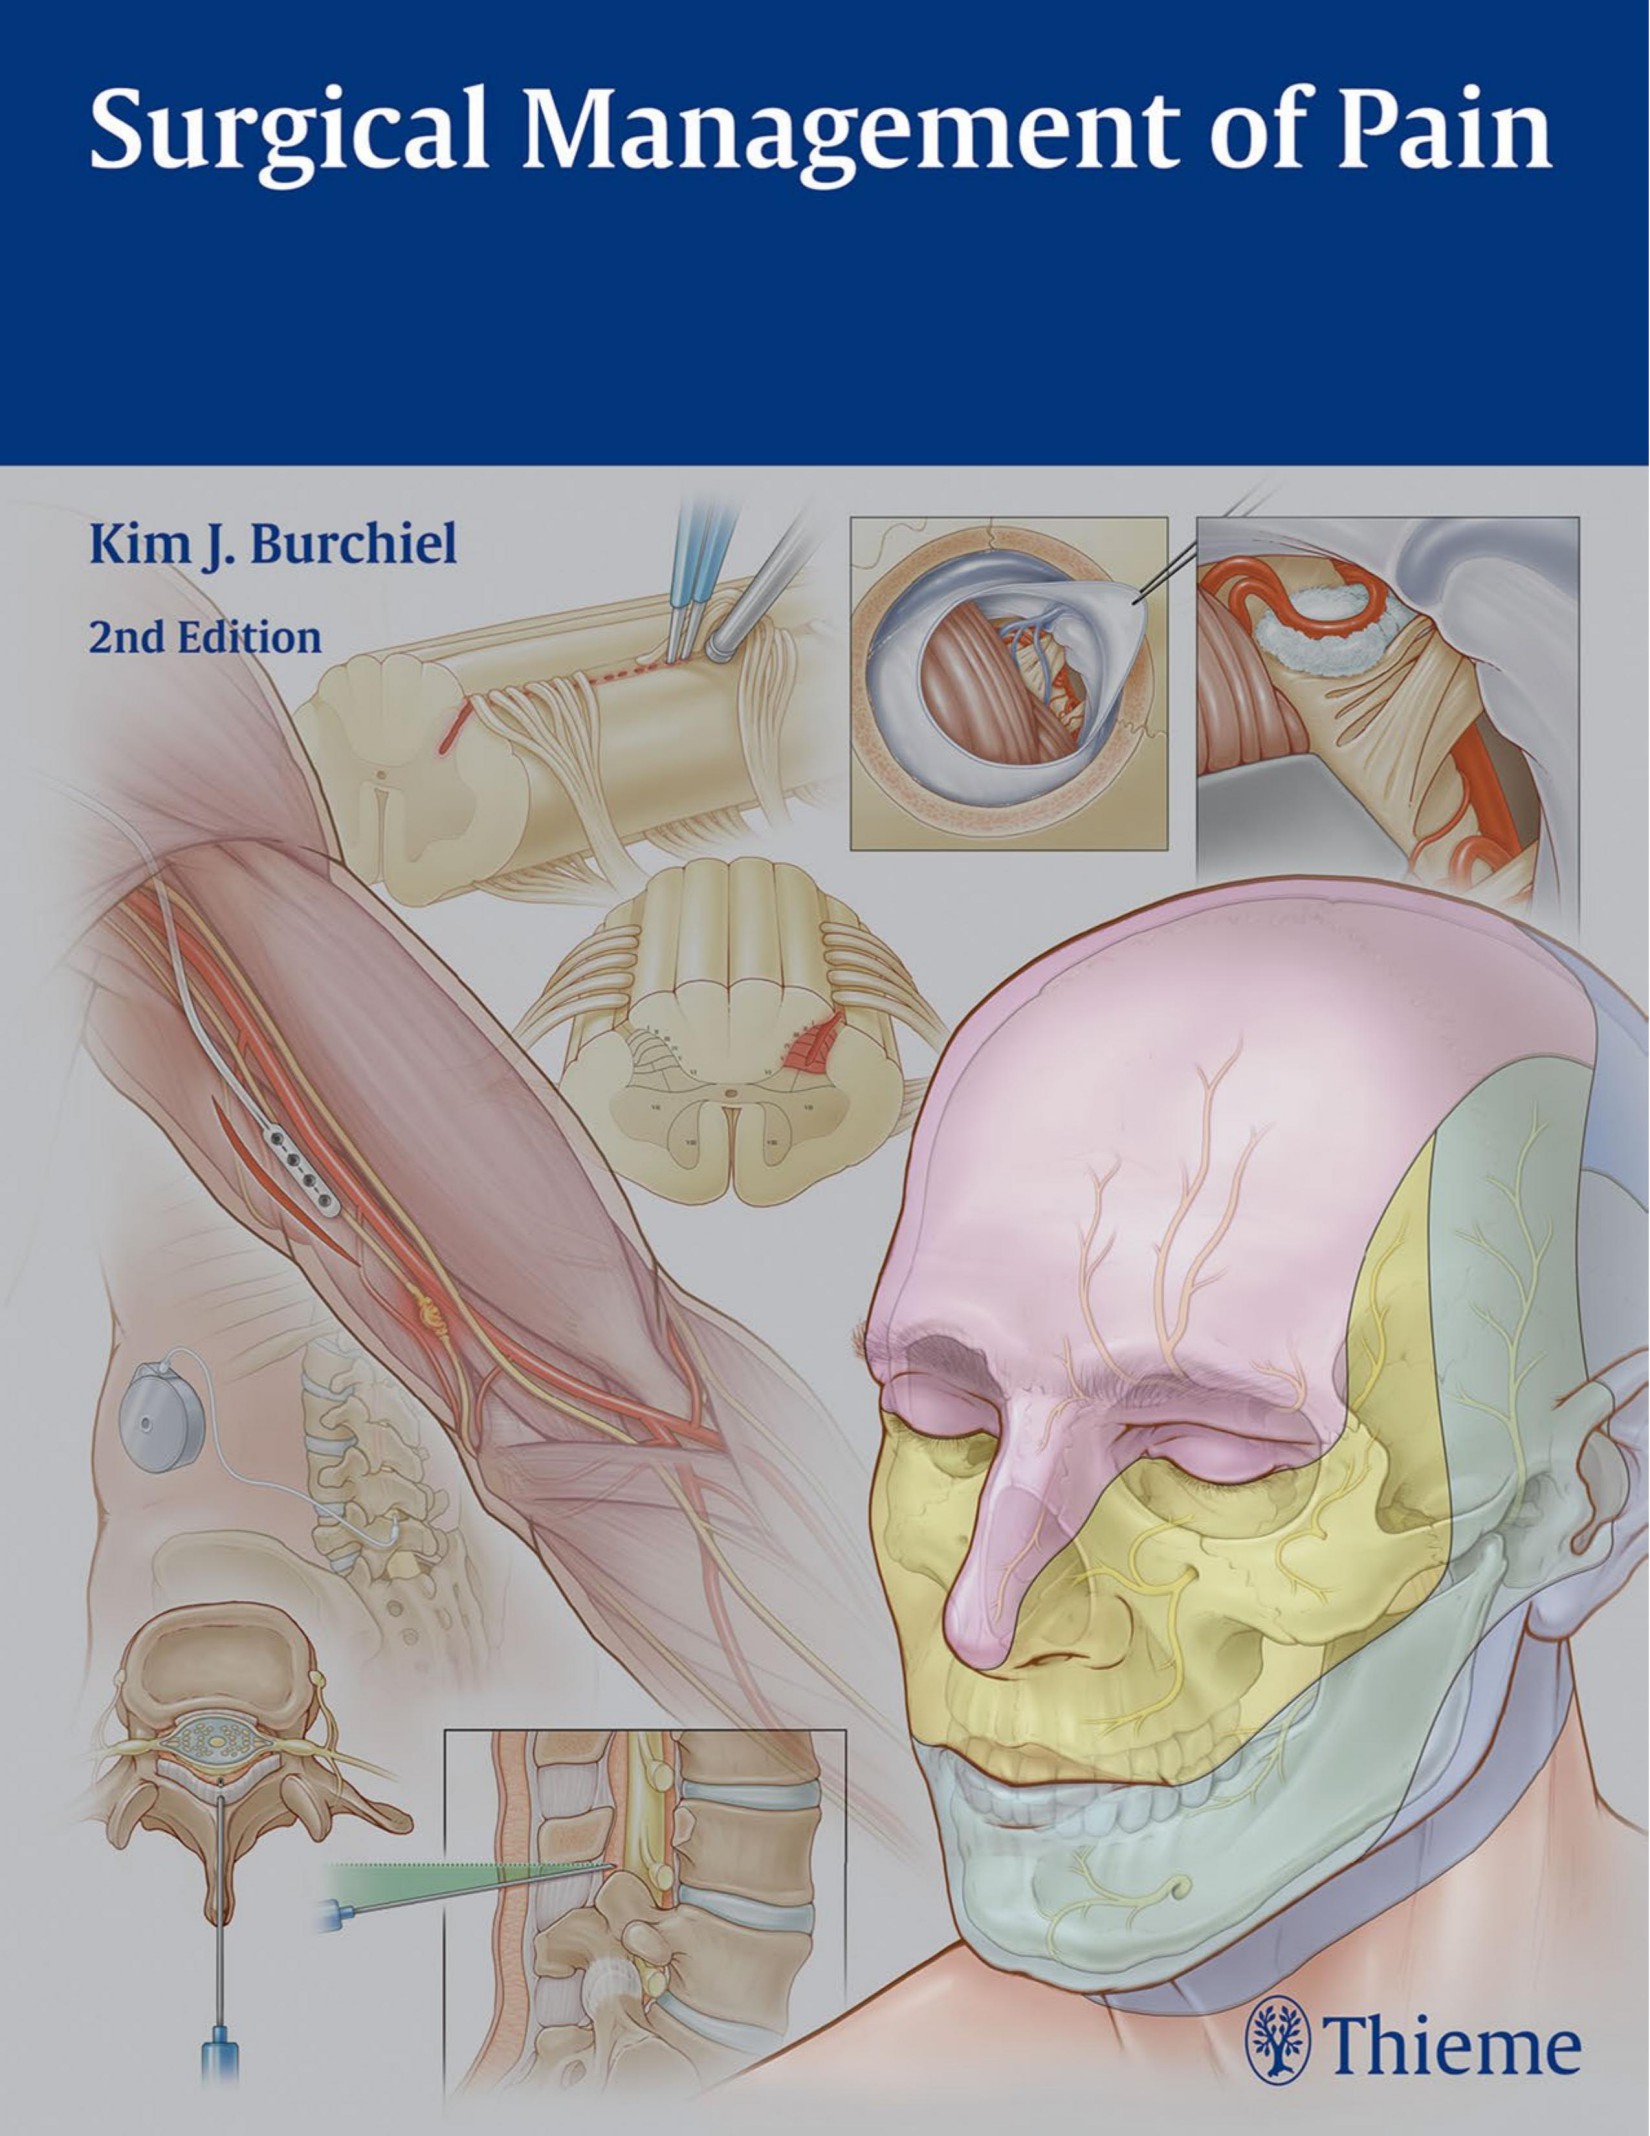 Surgical Management of Pain,2nd Edition.jpg